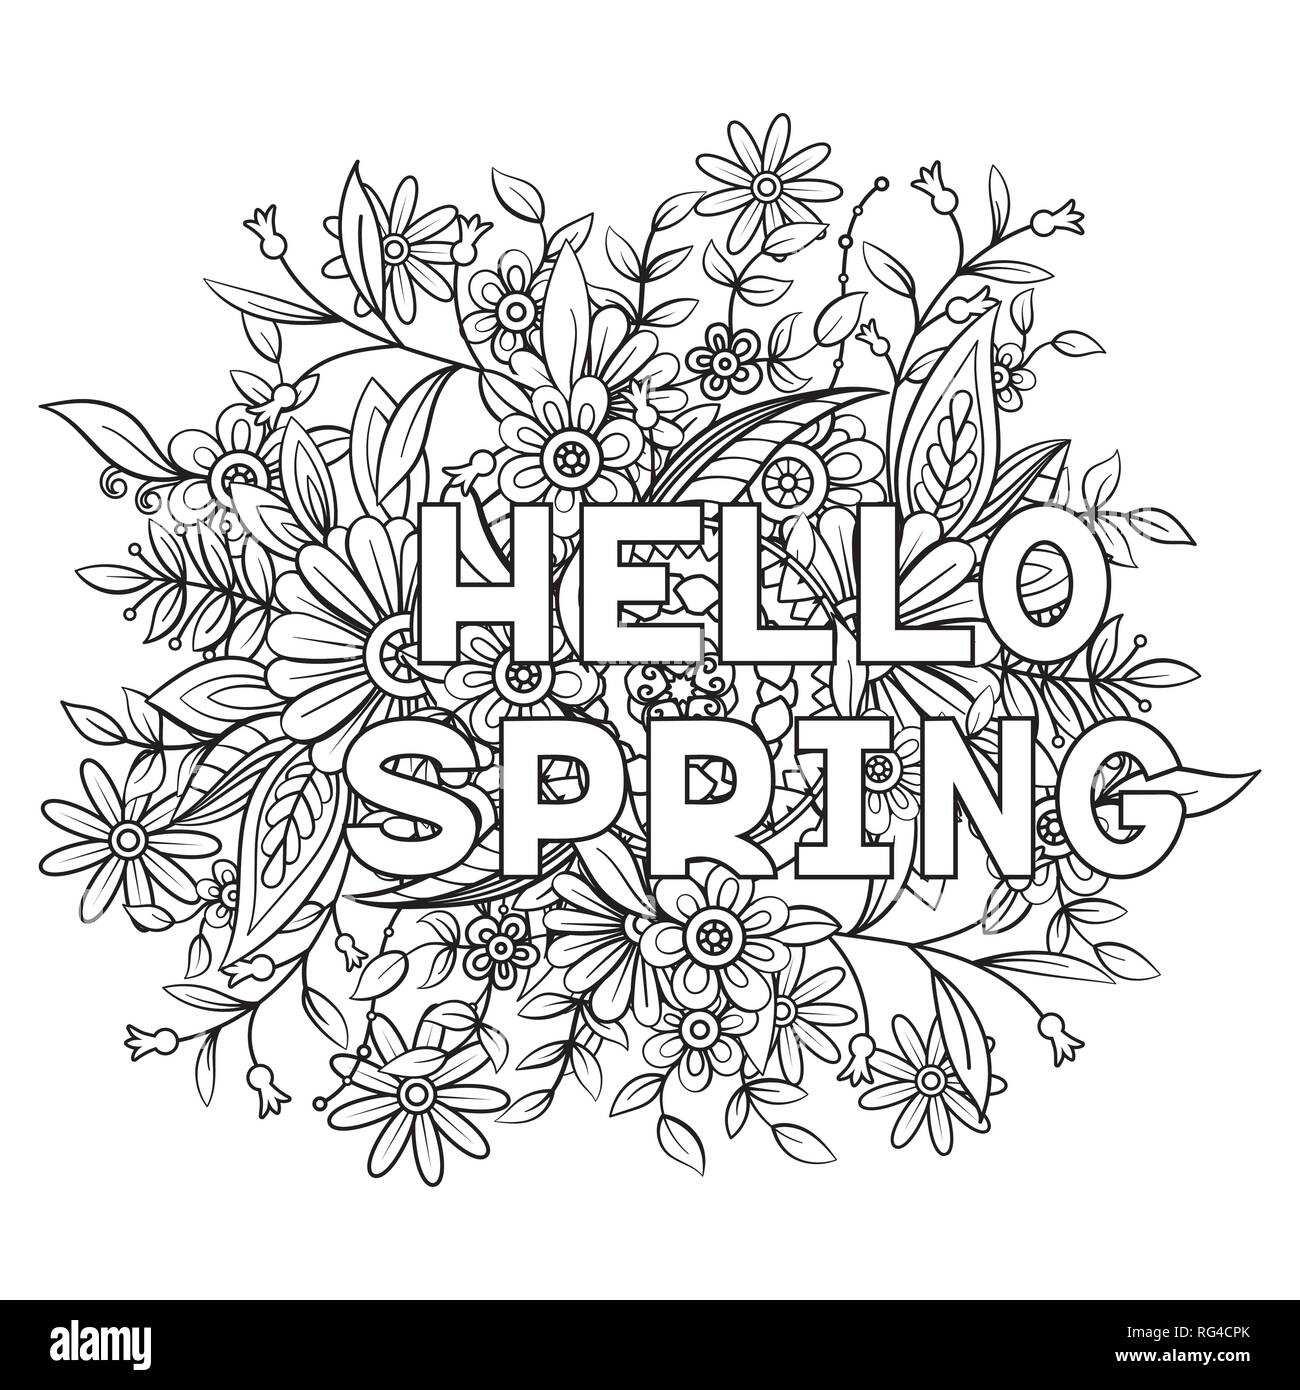 Hello spring coloring page with beautiful flowers. Black and white ...